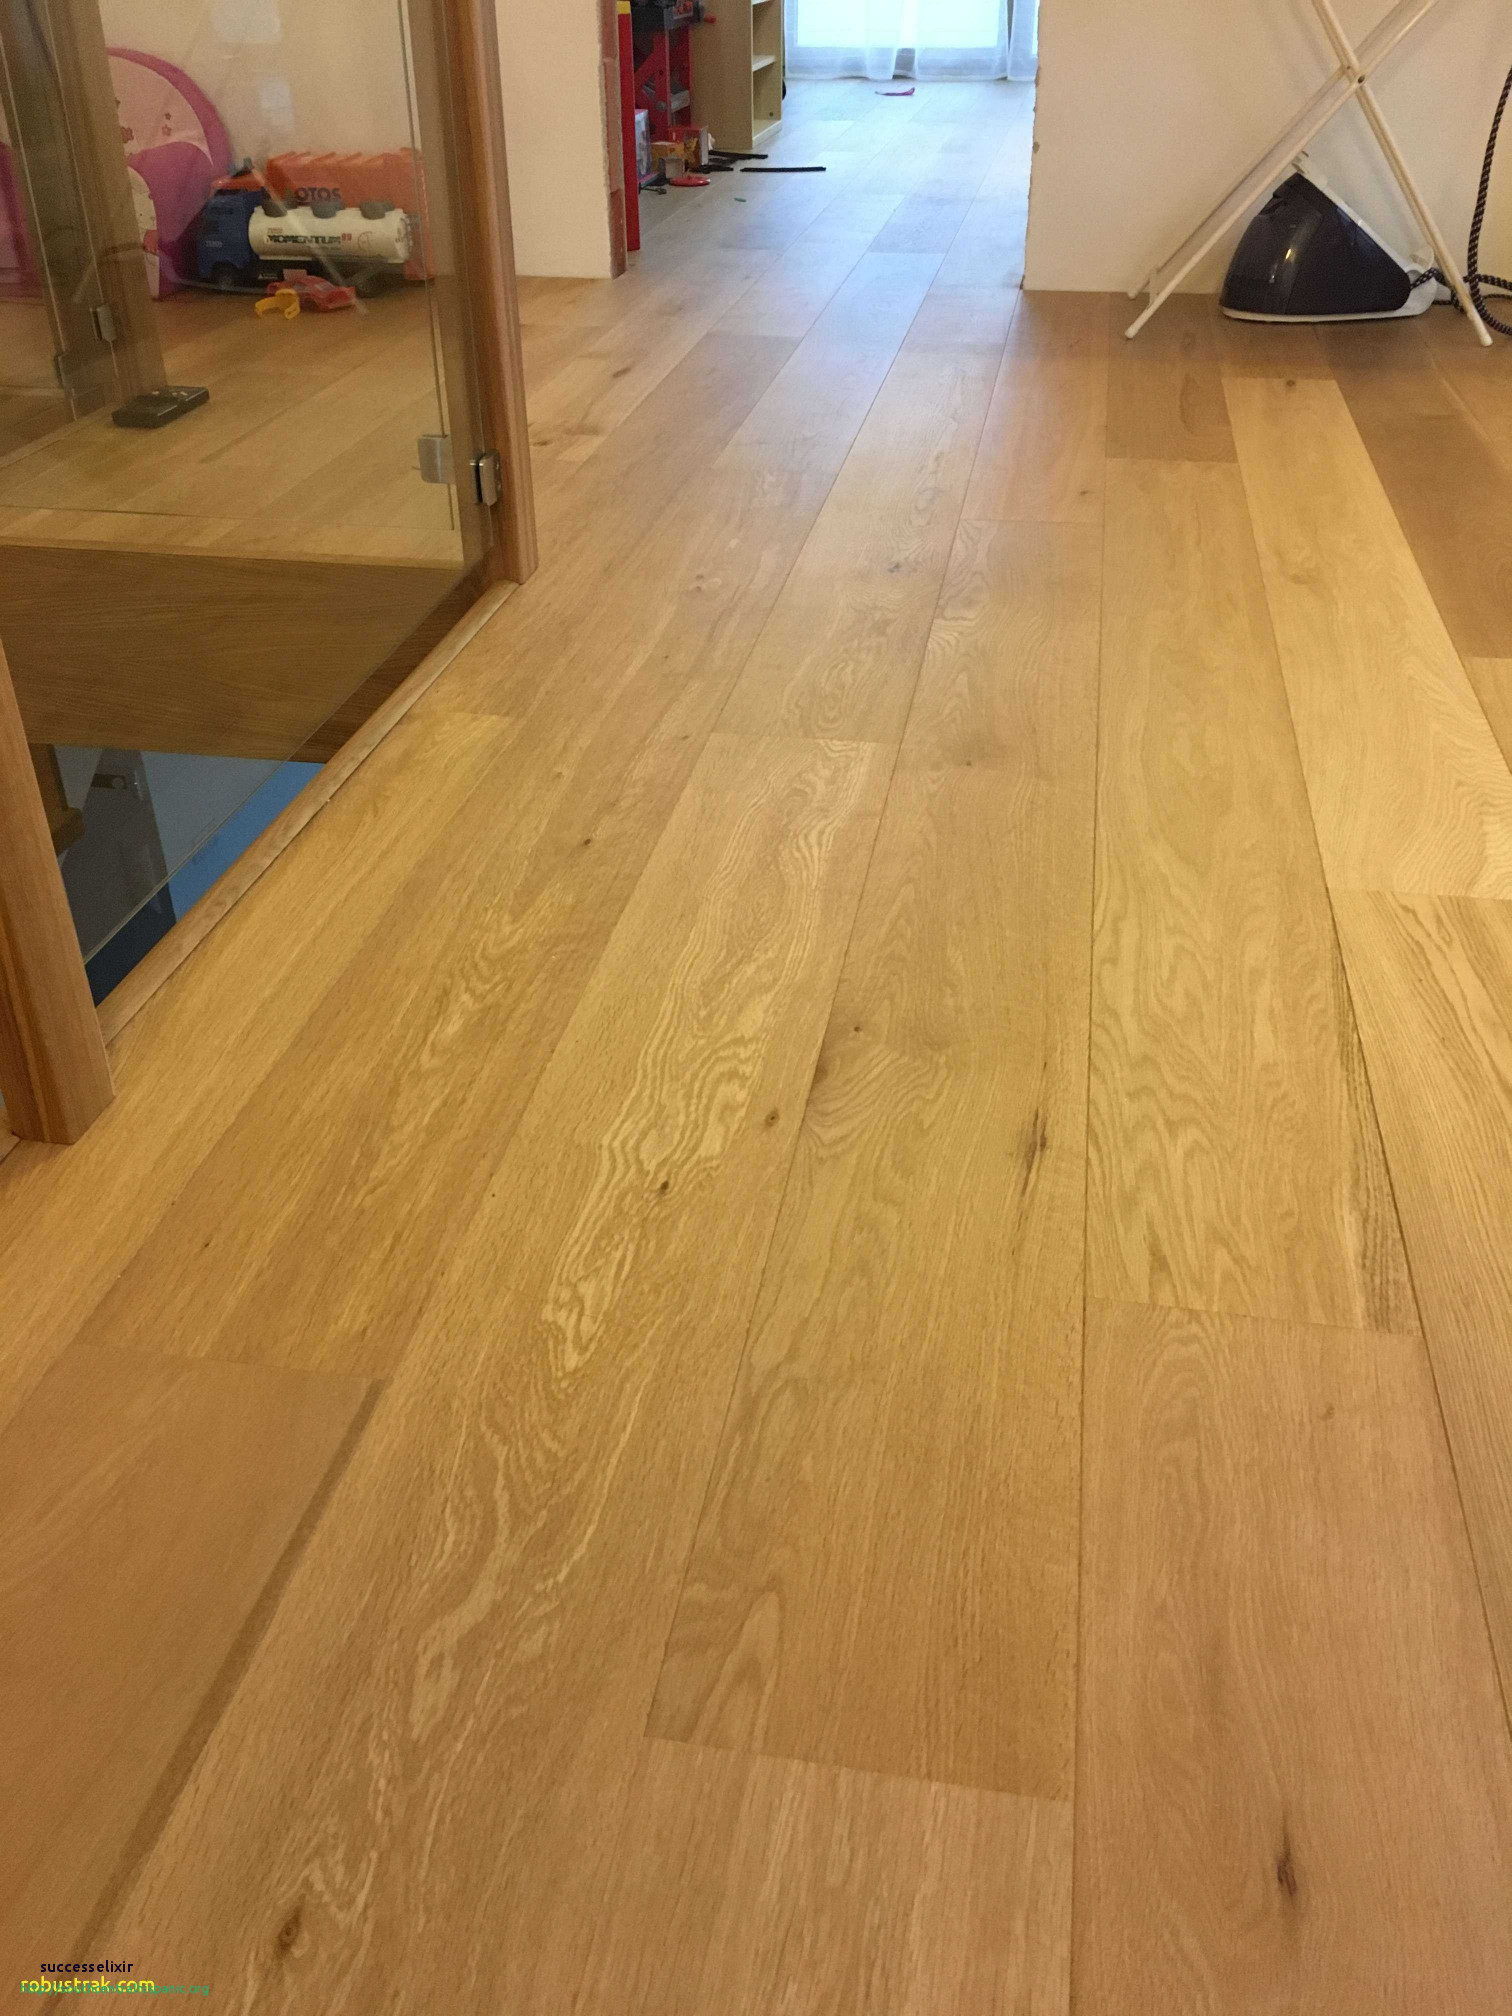 Hardwood Floor On Carpet Of 33 Incredible Discount Laminate Flooring Design with Best Place to Buy Laminate Flooring Inspirant Laminate Flooring Looks Like Wood New Naturalny Dub Od